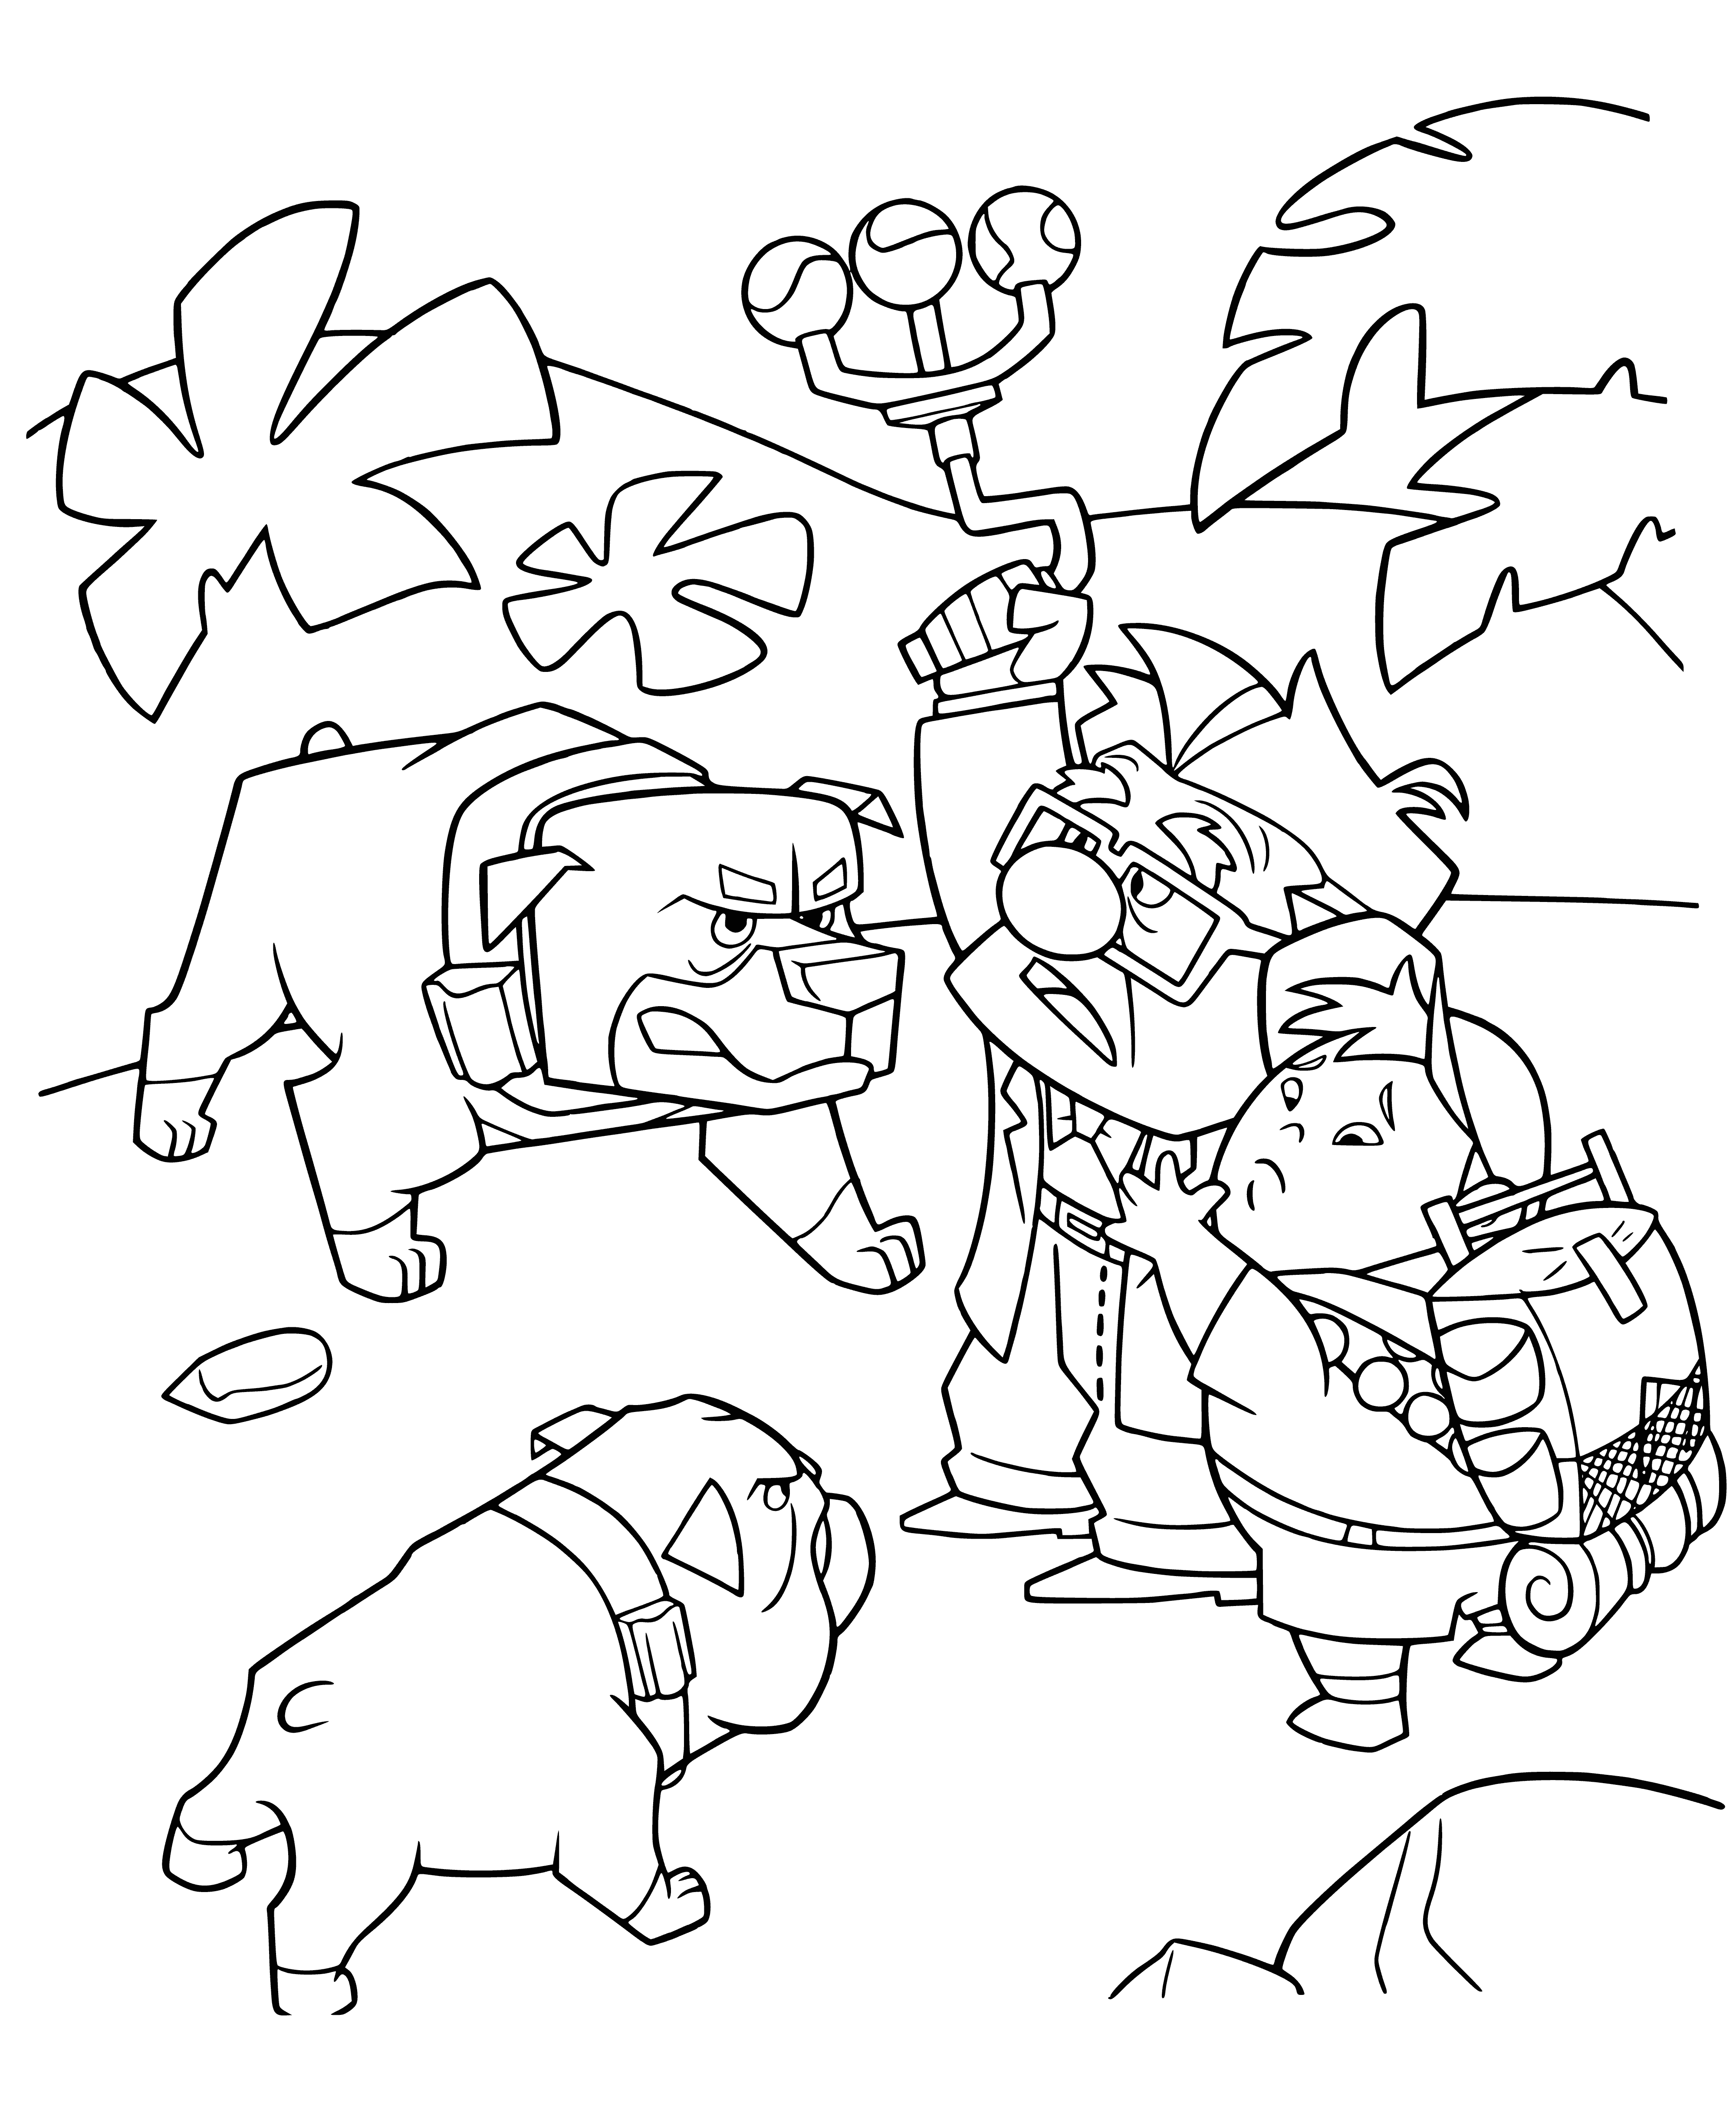 Dogs surround coloring page